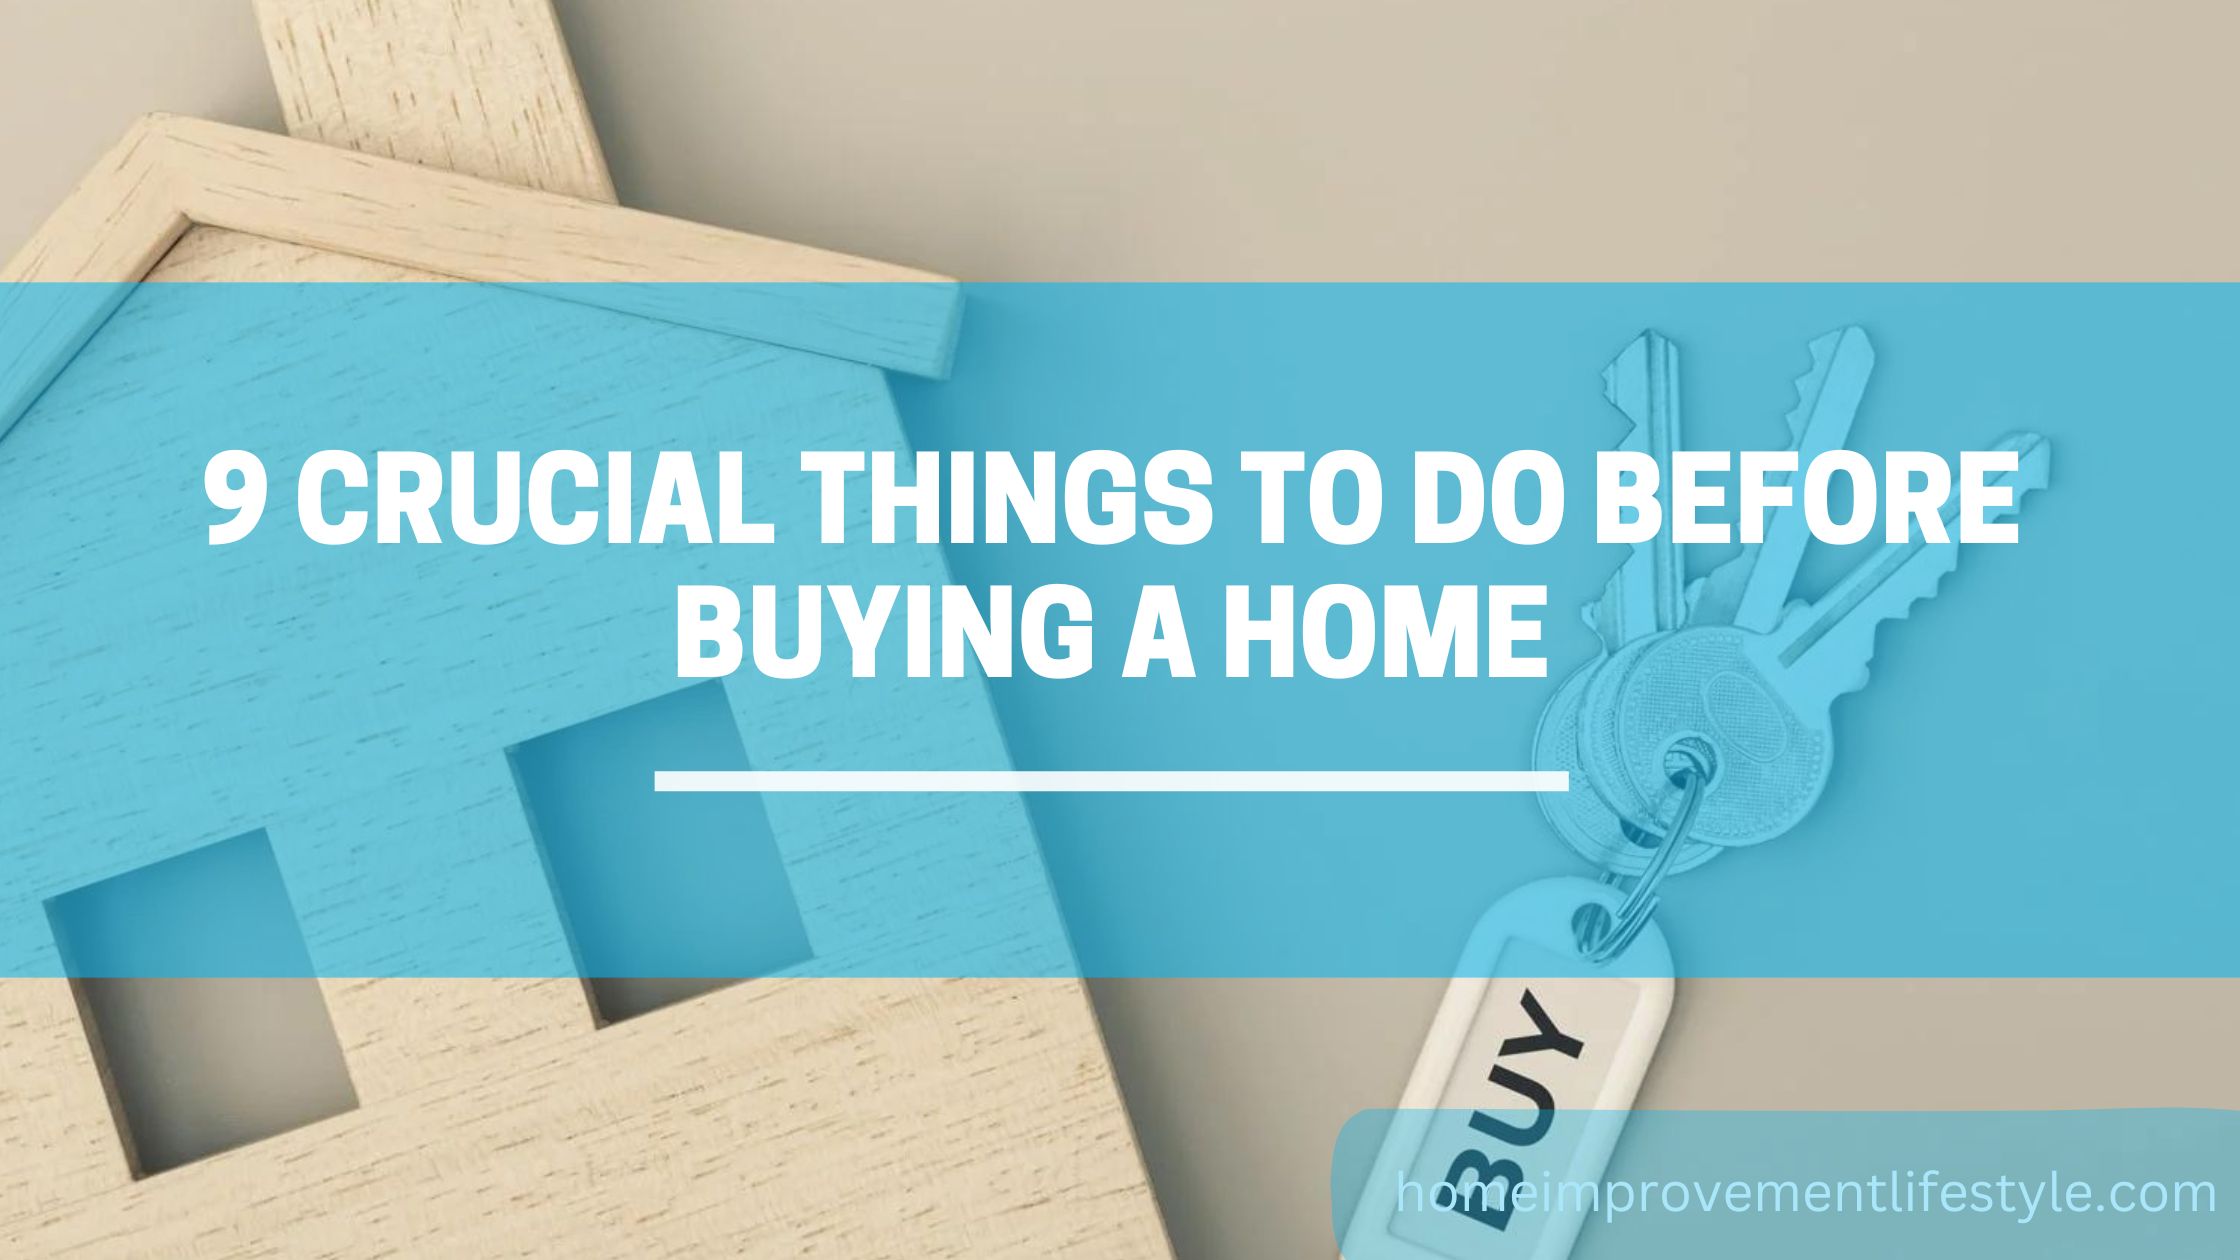 9 Crucial Things to do Before Buying a Home